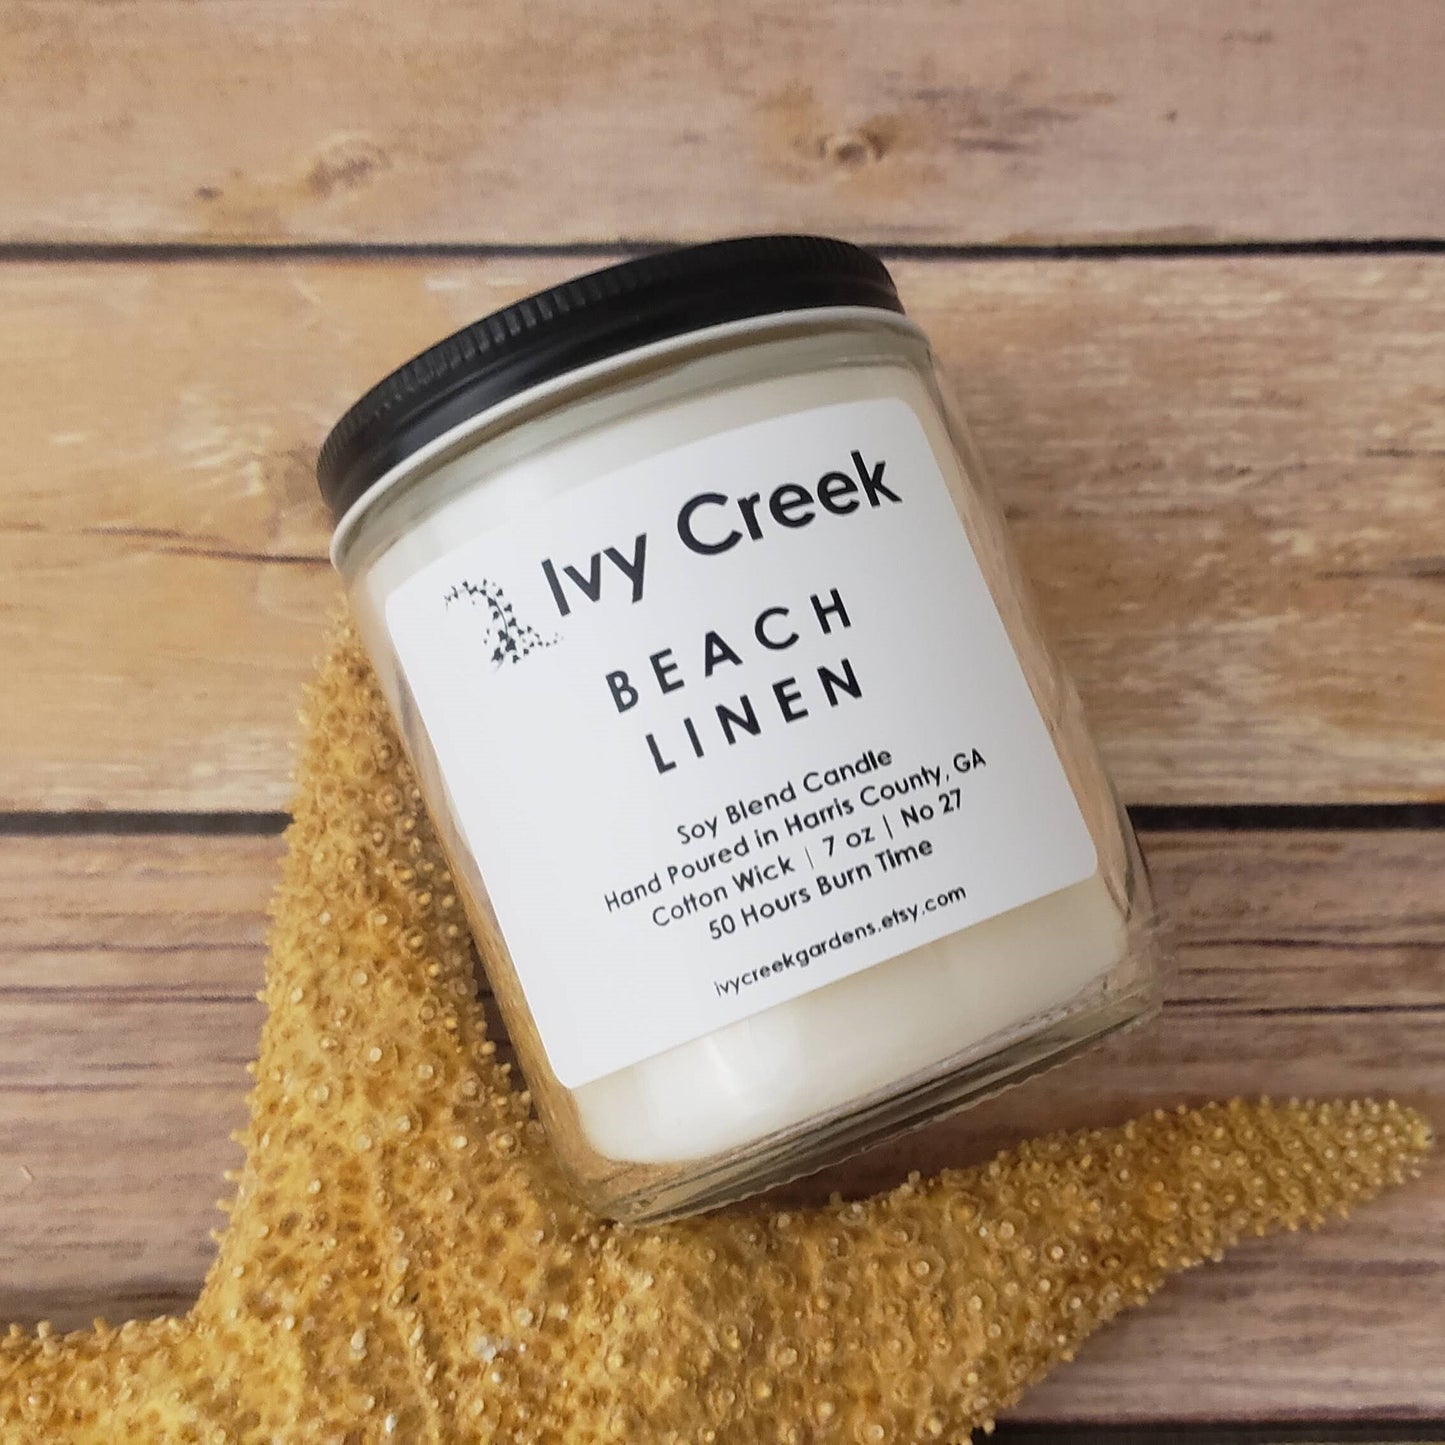 Ivy Creek No 27 | Beach Linen Soy Blend Candle | Hand Poured | 7 oz | Cotton Wick | Small Batch | Clean Burning | Container Candle